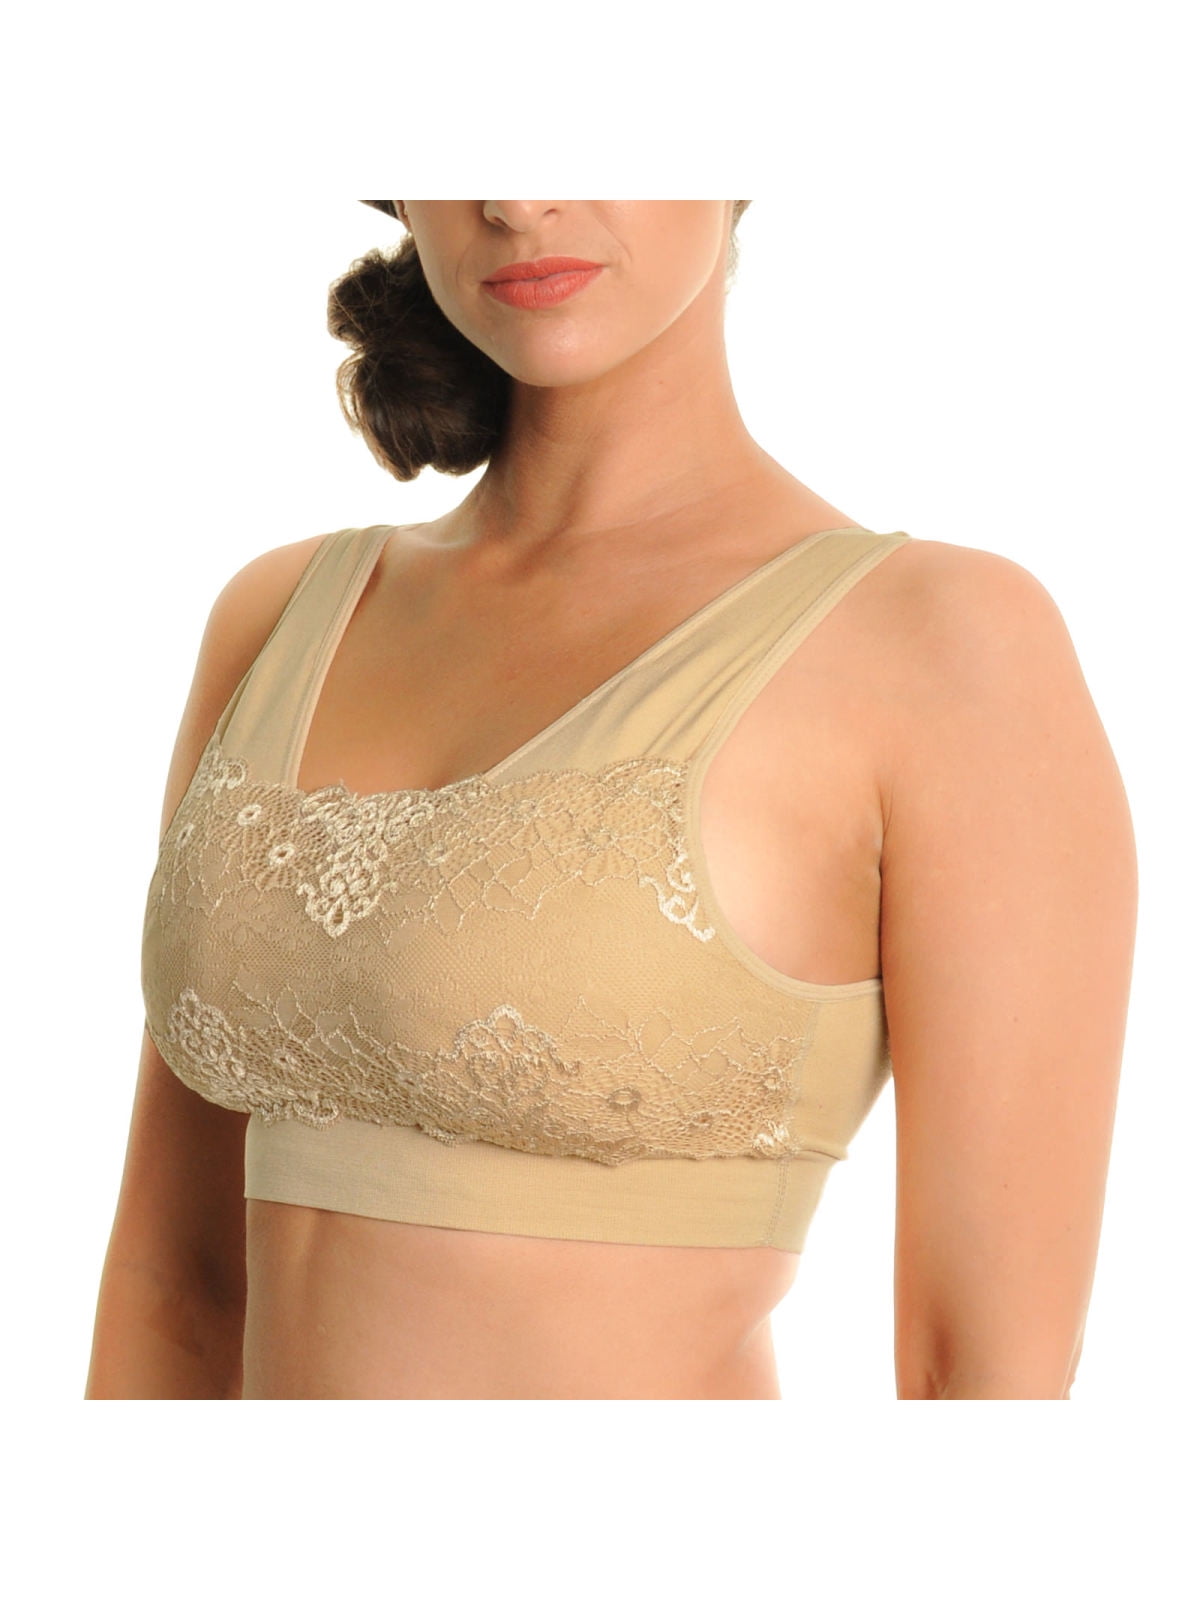 The Original Yellowberry Girls First Training Bra with Ultimate